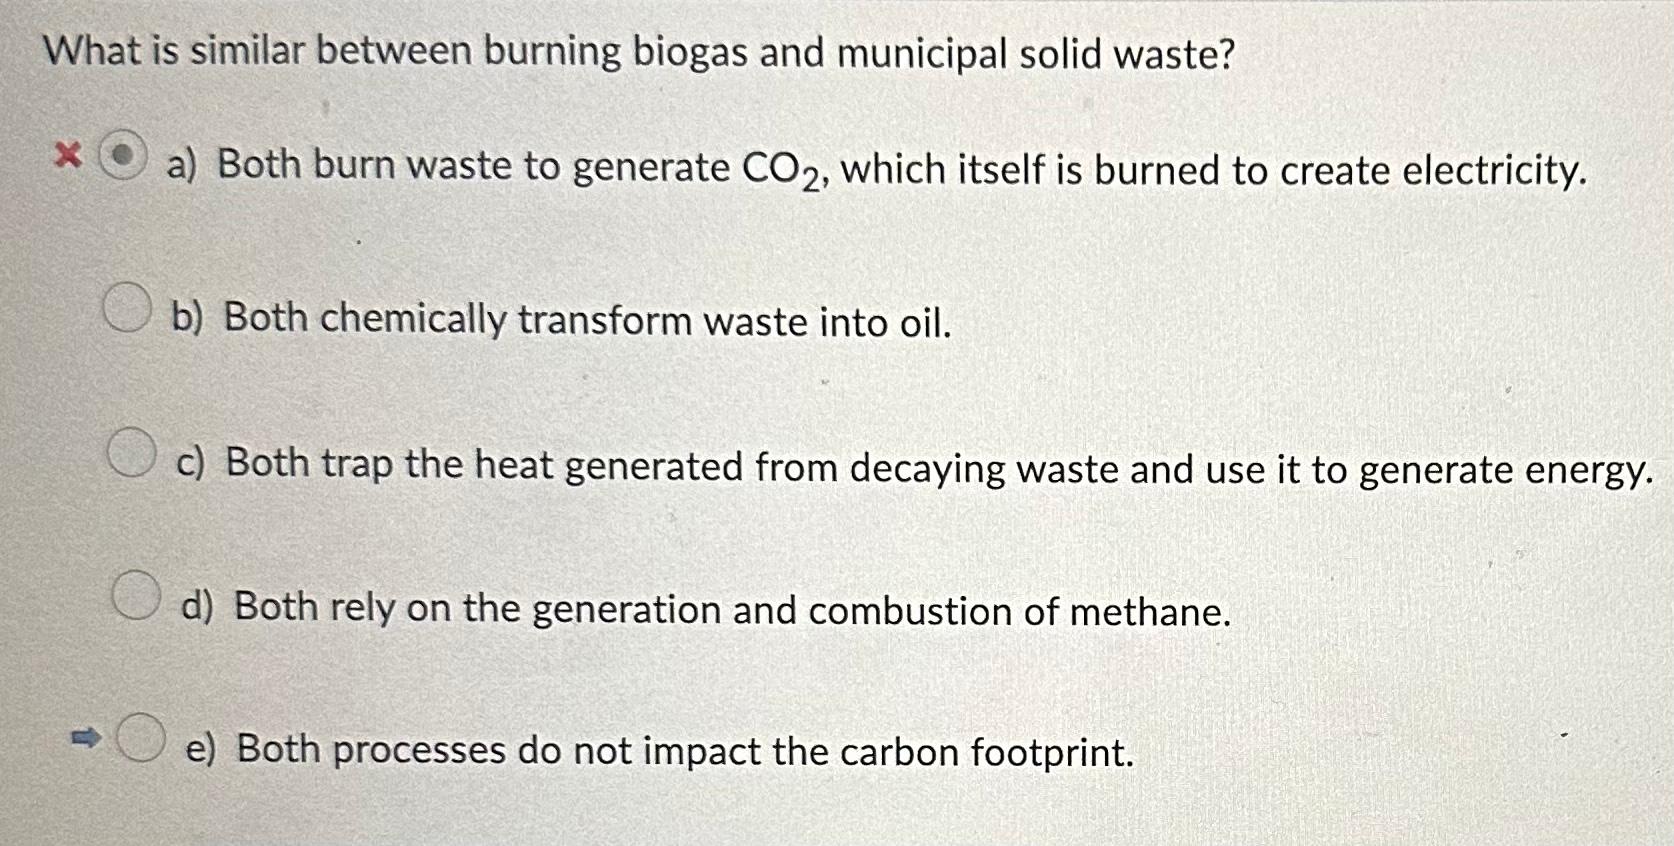 What is similar between burning biogas and municipal solid waste?
a) Both burn waste to generate \( \mathrm{CO}_{2} \), which